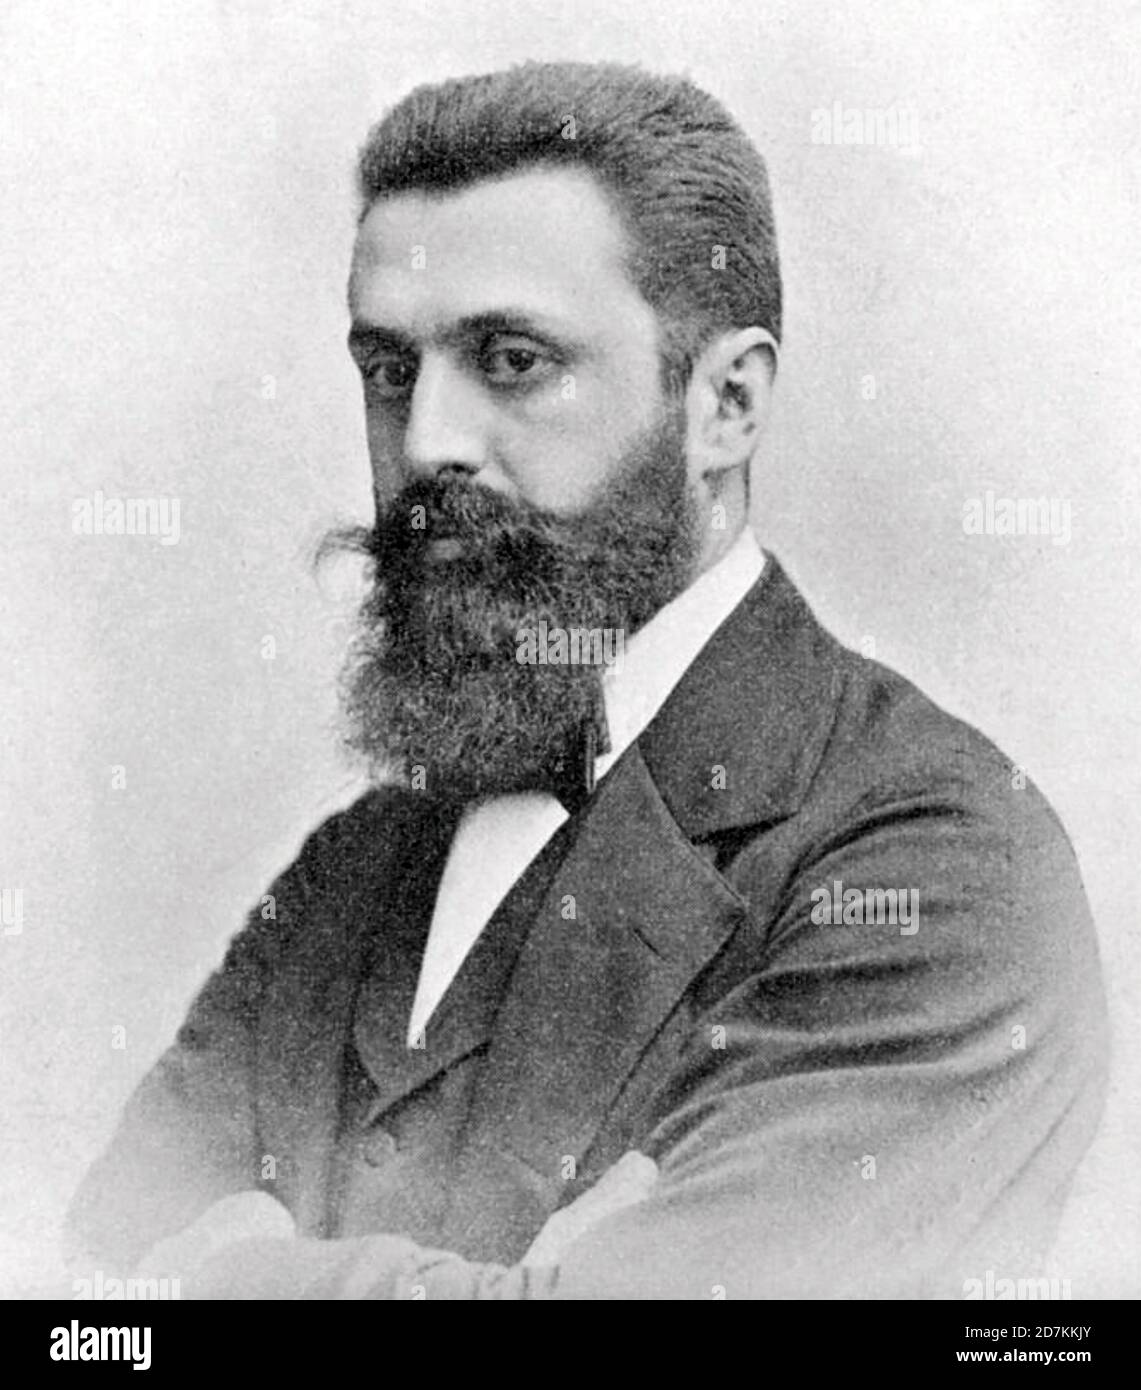 THEODOR HERZL (1860-1904) Austro-Hungarian founder of the Zionist Organisation in an 1897 photo. Stock Photo